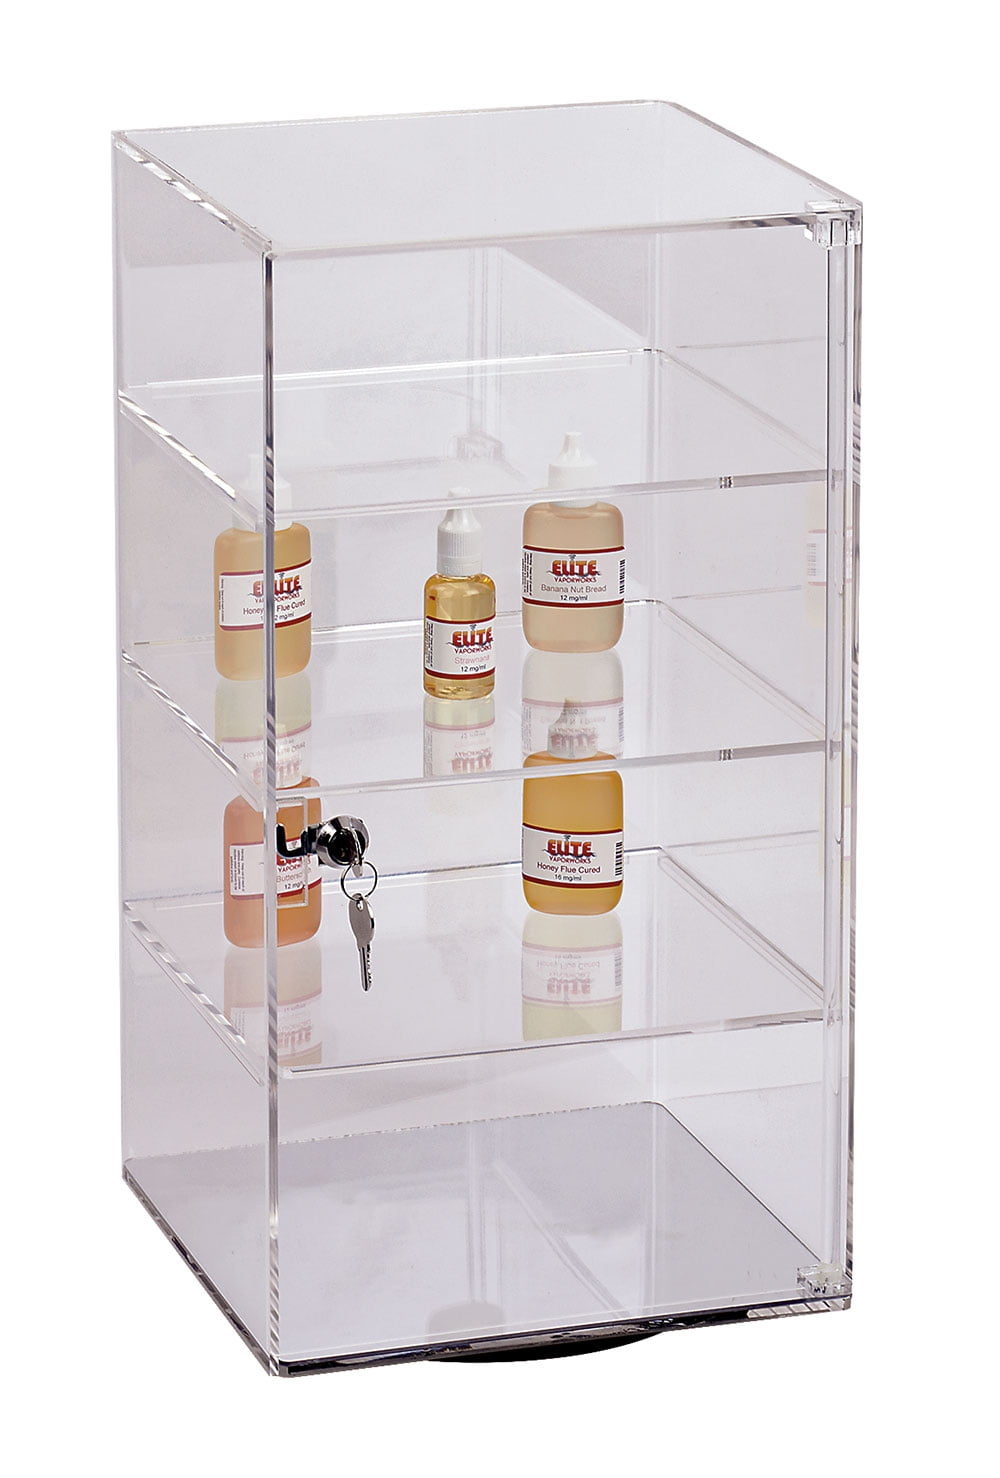 Acrylic Counter Top Display Case 12"x 9.5" x19"Locking Cabinet Showcase Boxes 